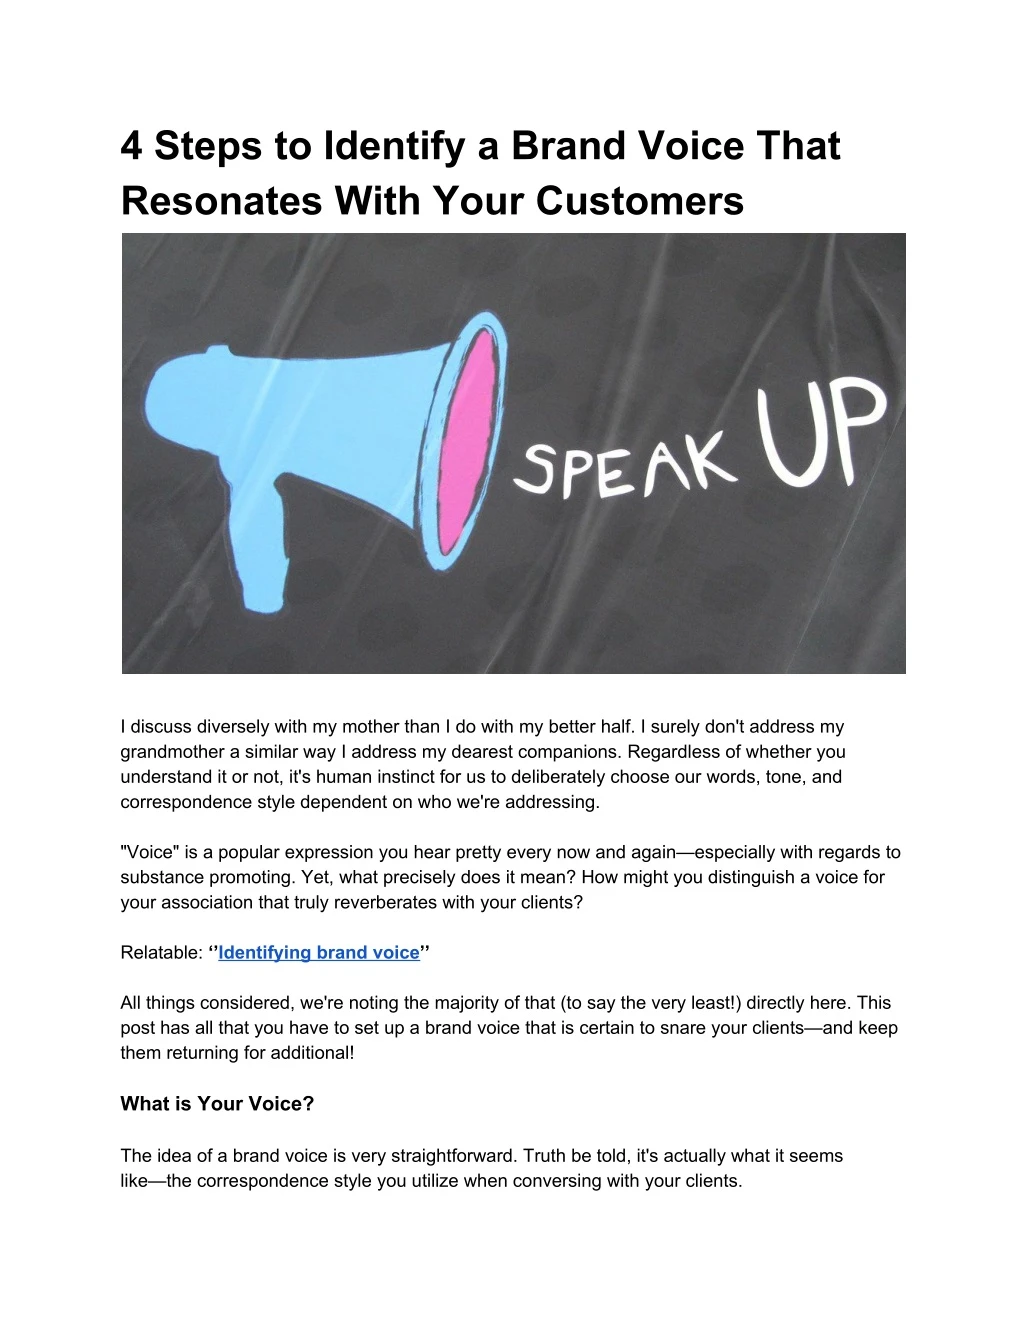 4 steps to identify a brand voice that resonates